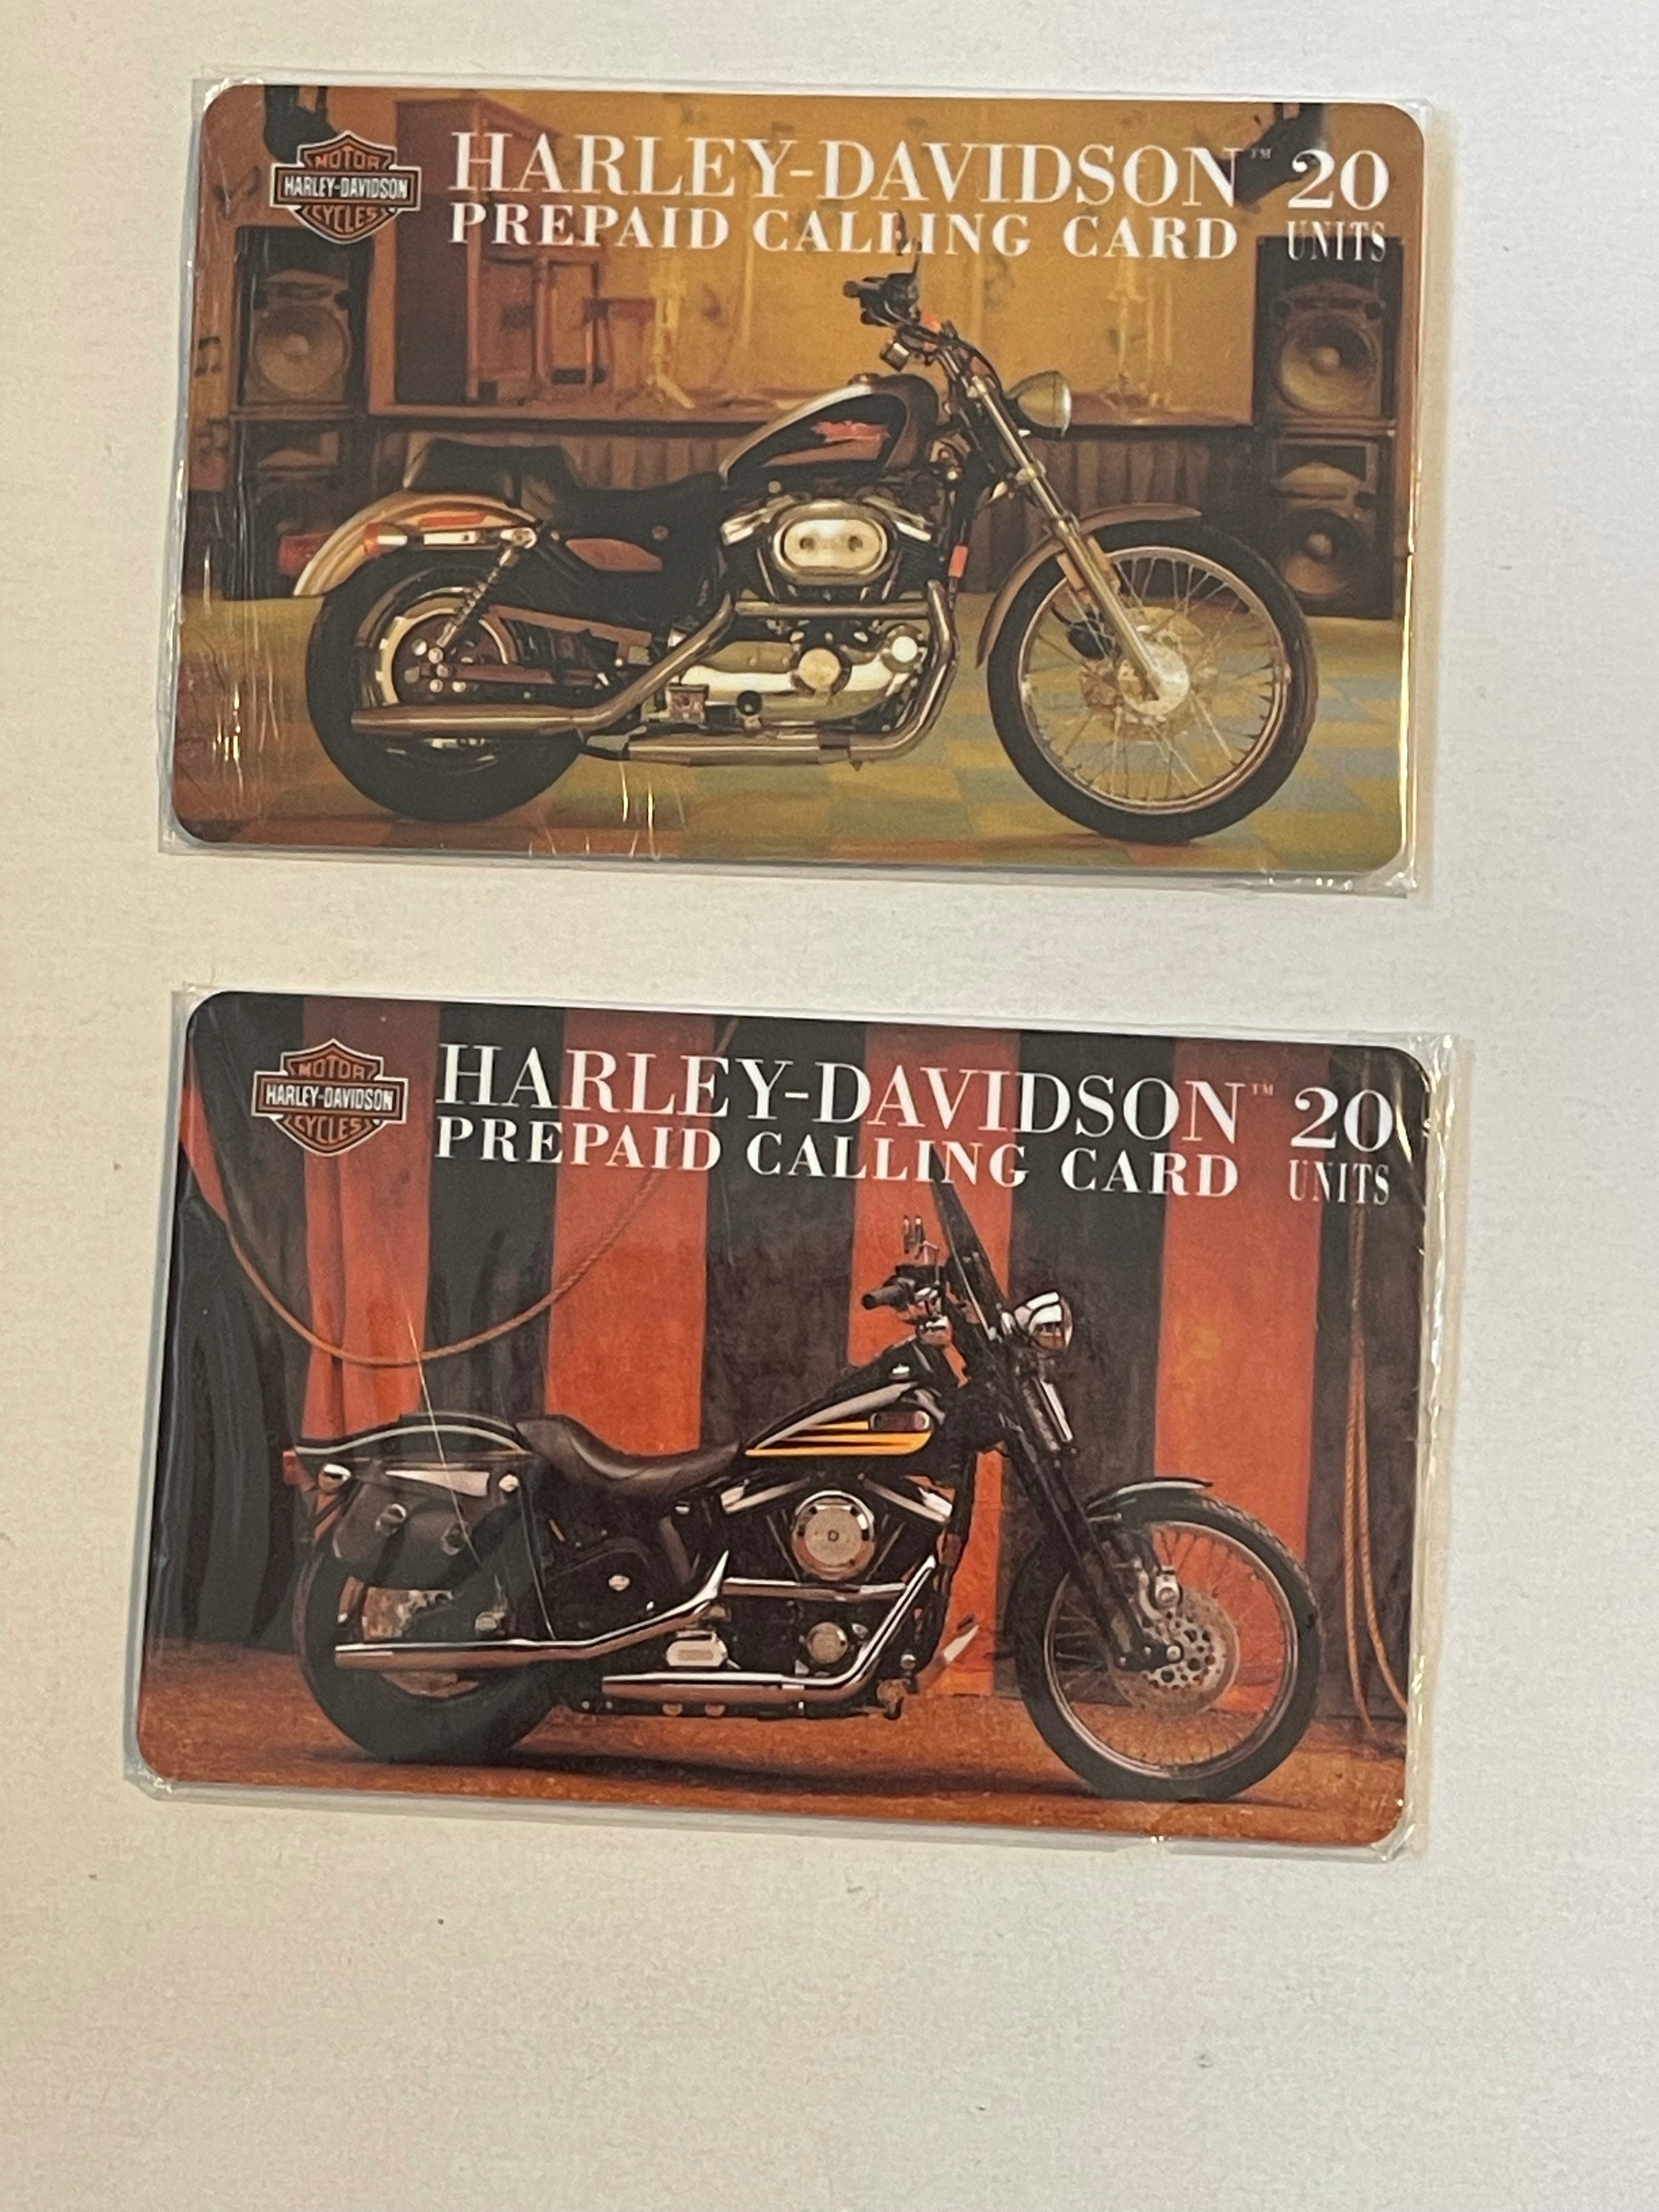 Harley-Davidson rare factory sealed two phone cards 1990s